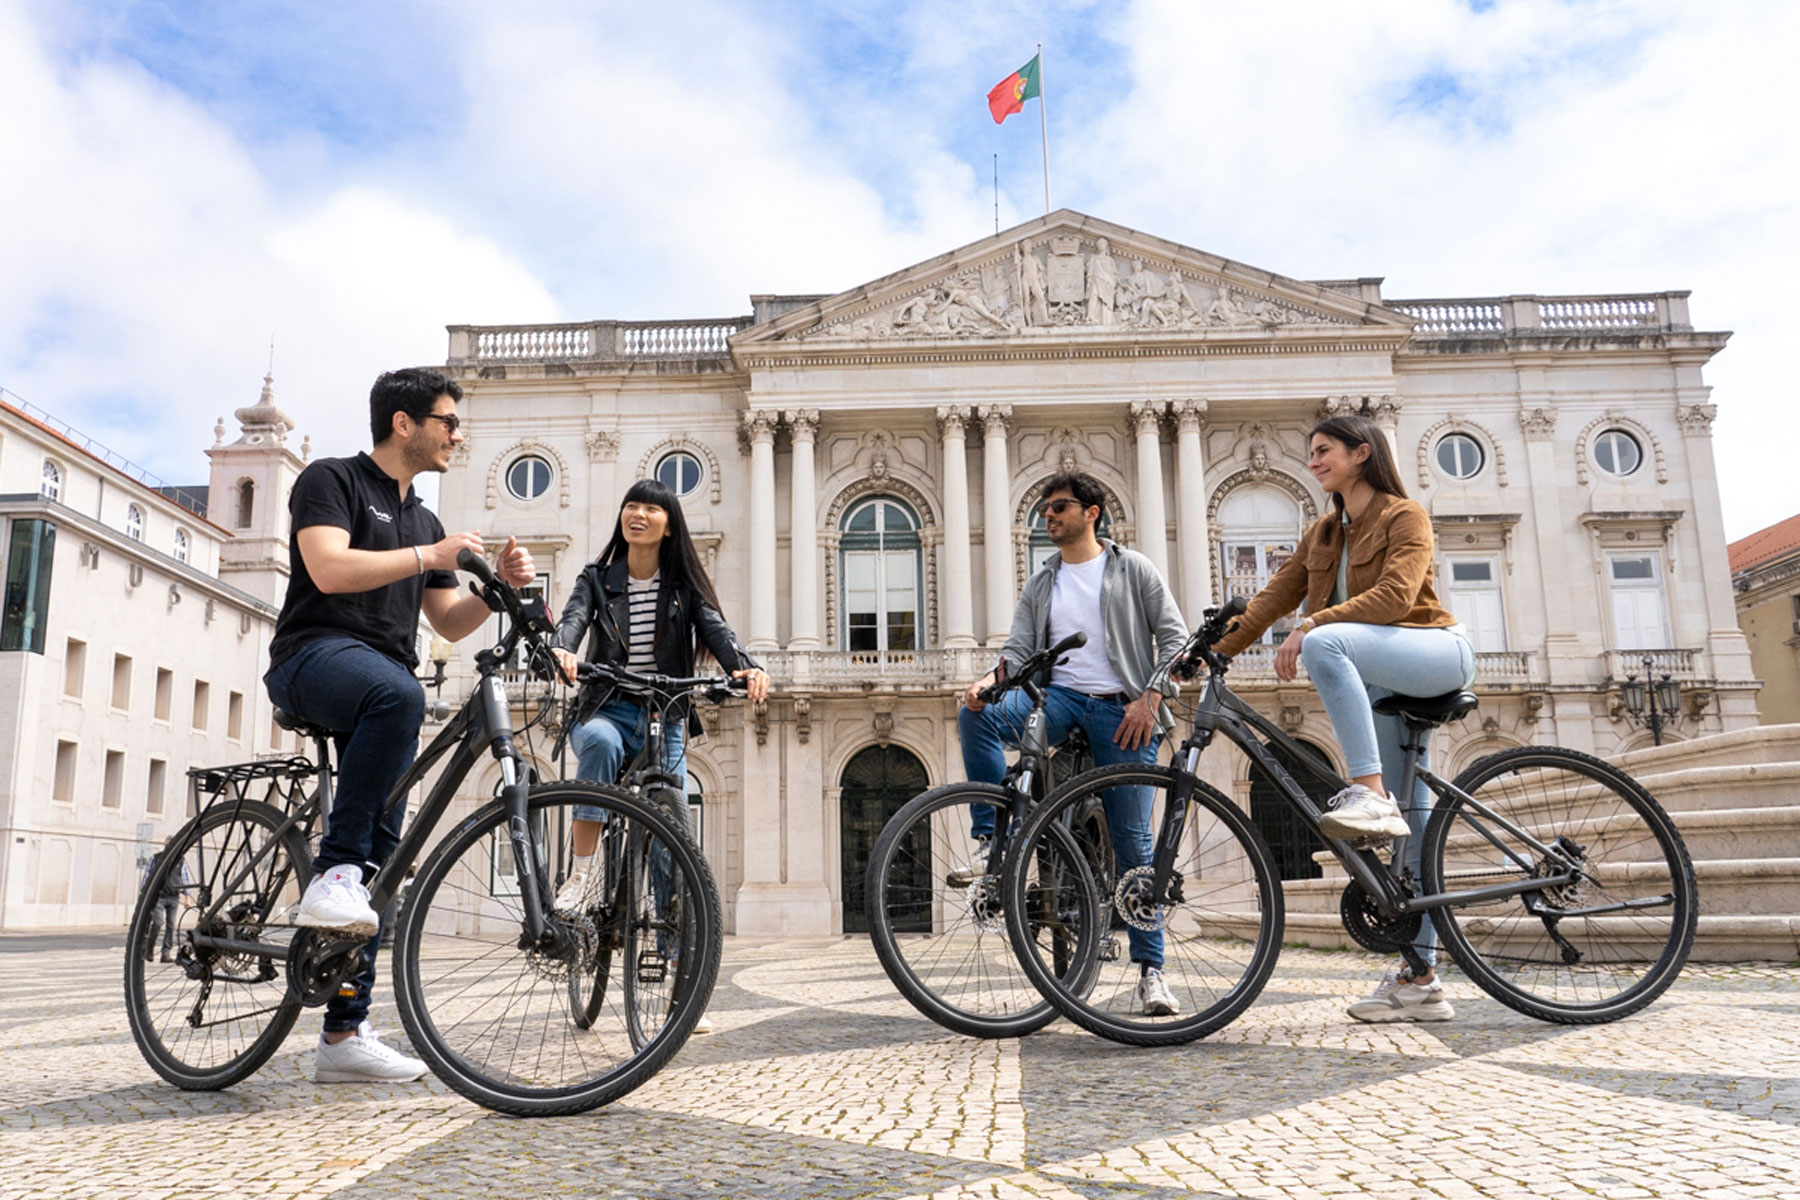 Cycling through the charming city of Lisbon: A bicycle adventure